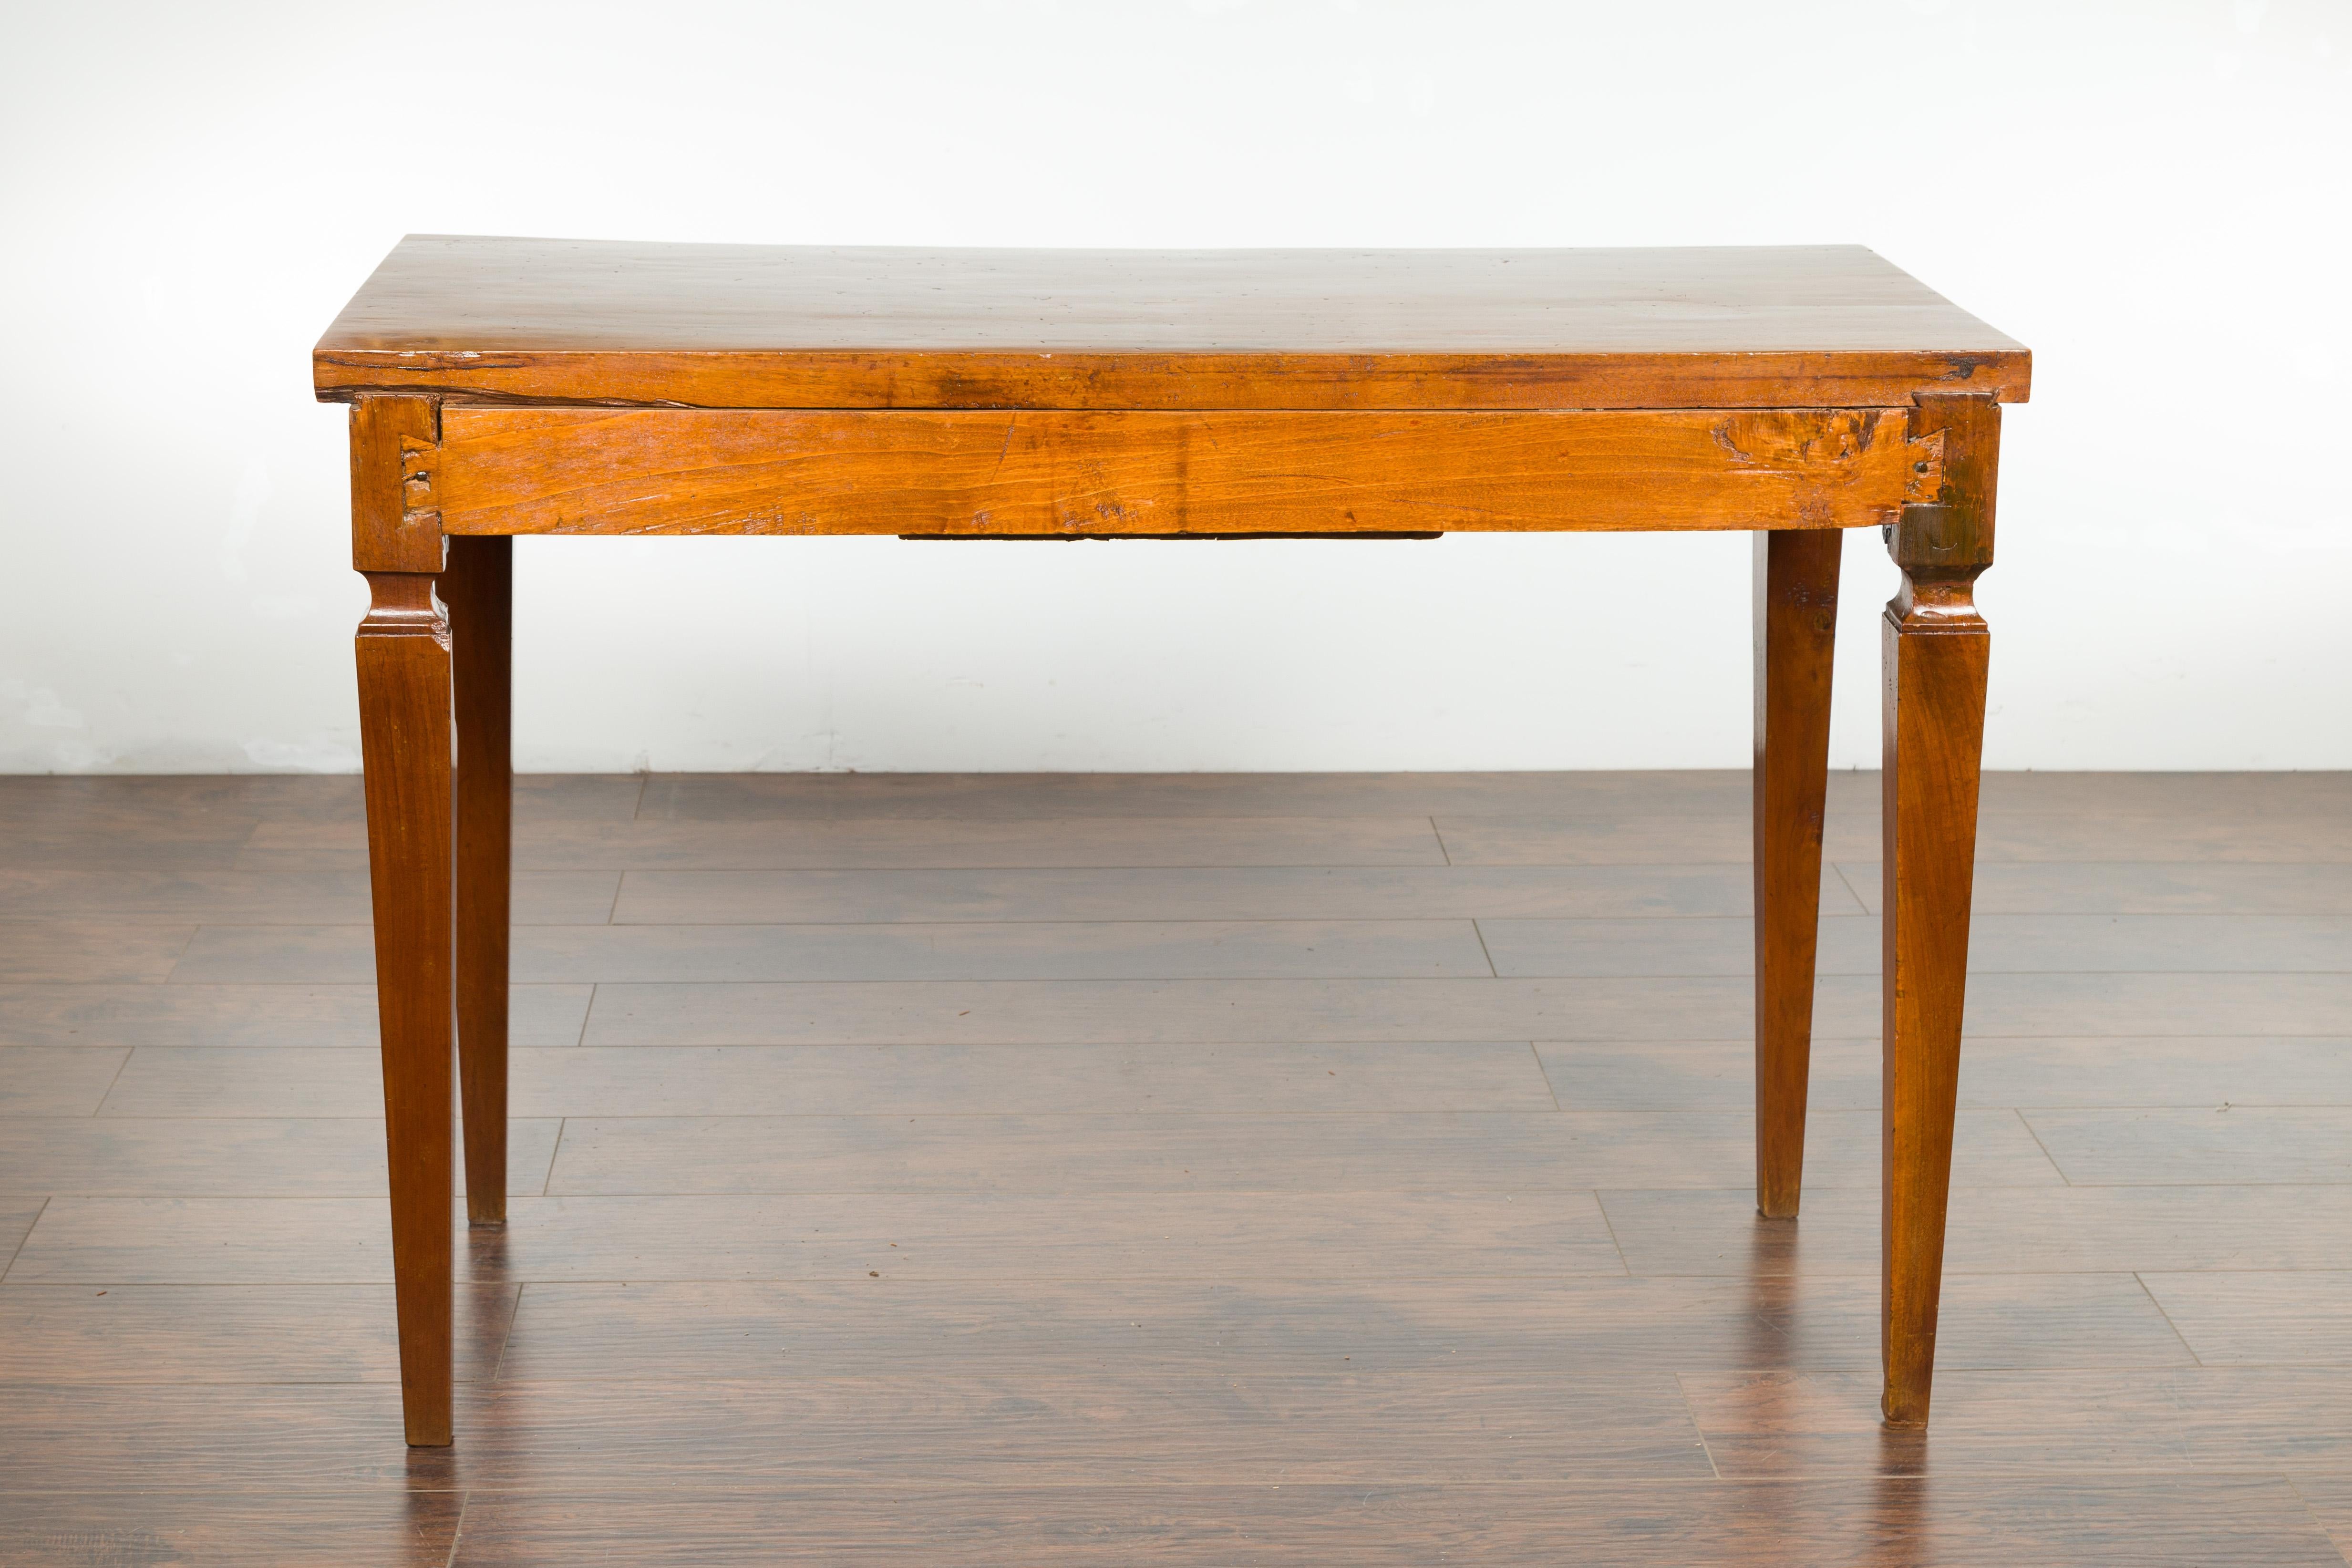 Italian 19th Century Walnut Desk with Single Drawer and Tapered Legs For Sale 9